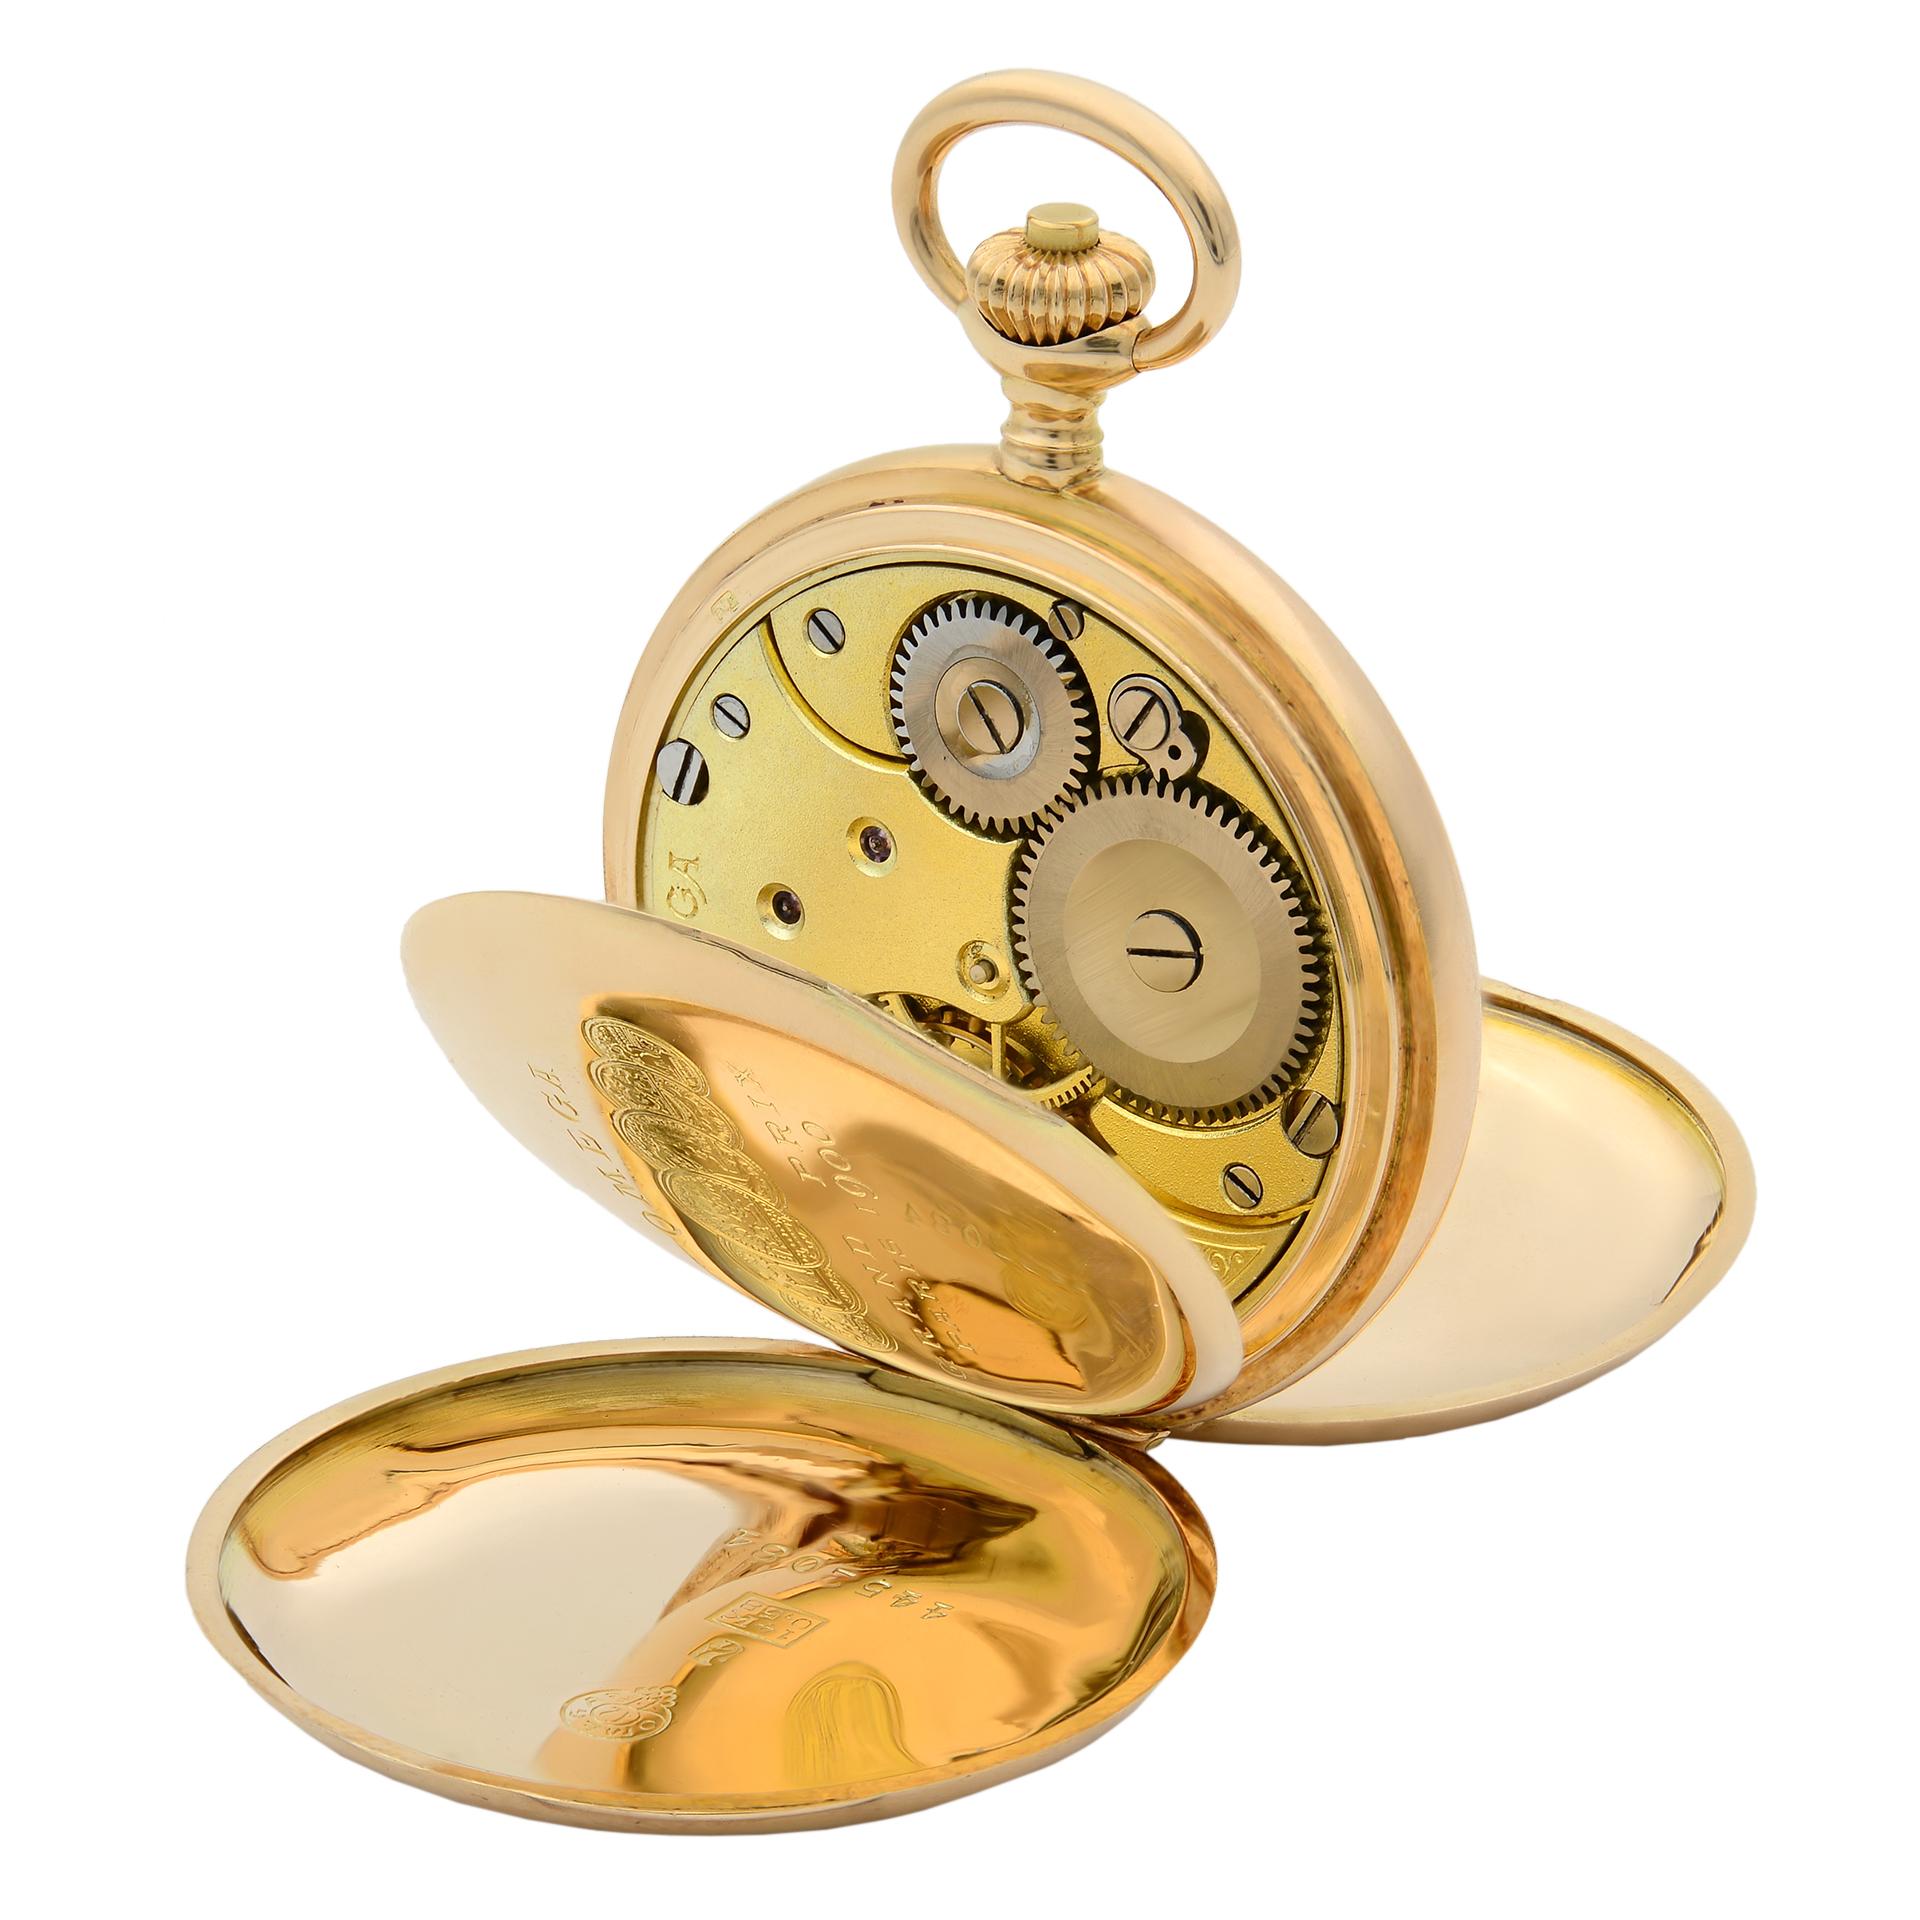 This watch was produced between Years 1912-1916.
Very well Preserved condition. 
Total Weight of the watch is 38.8 Grams